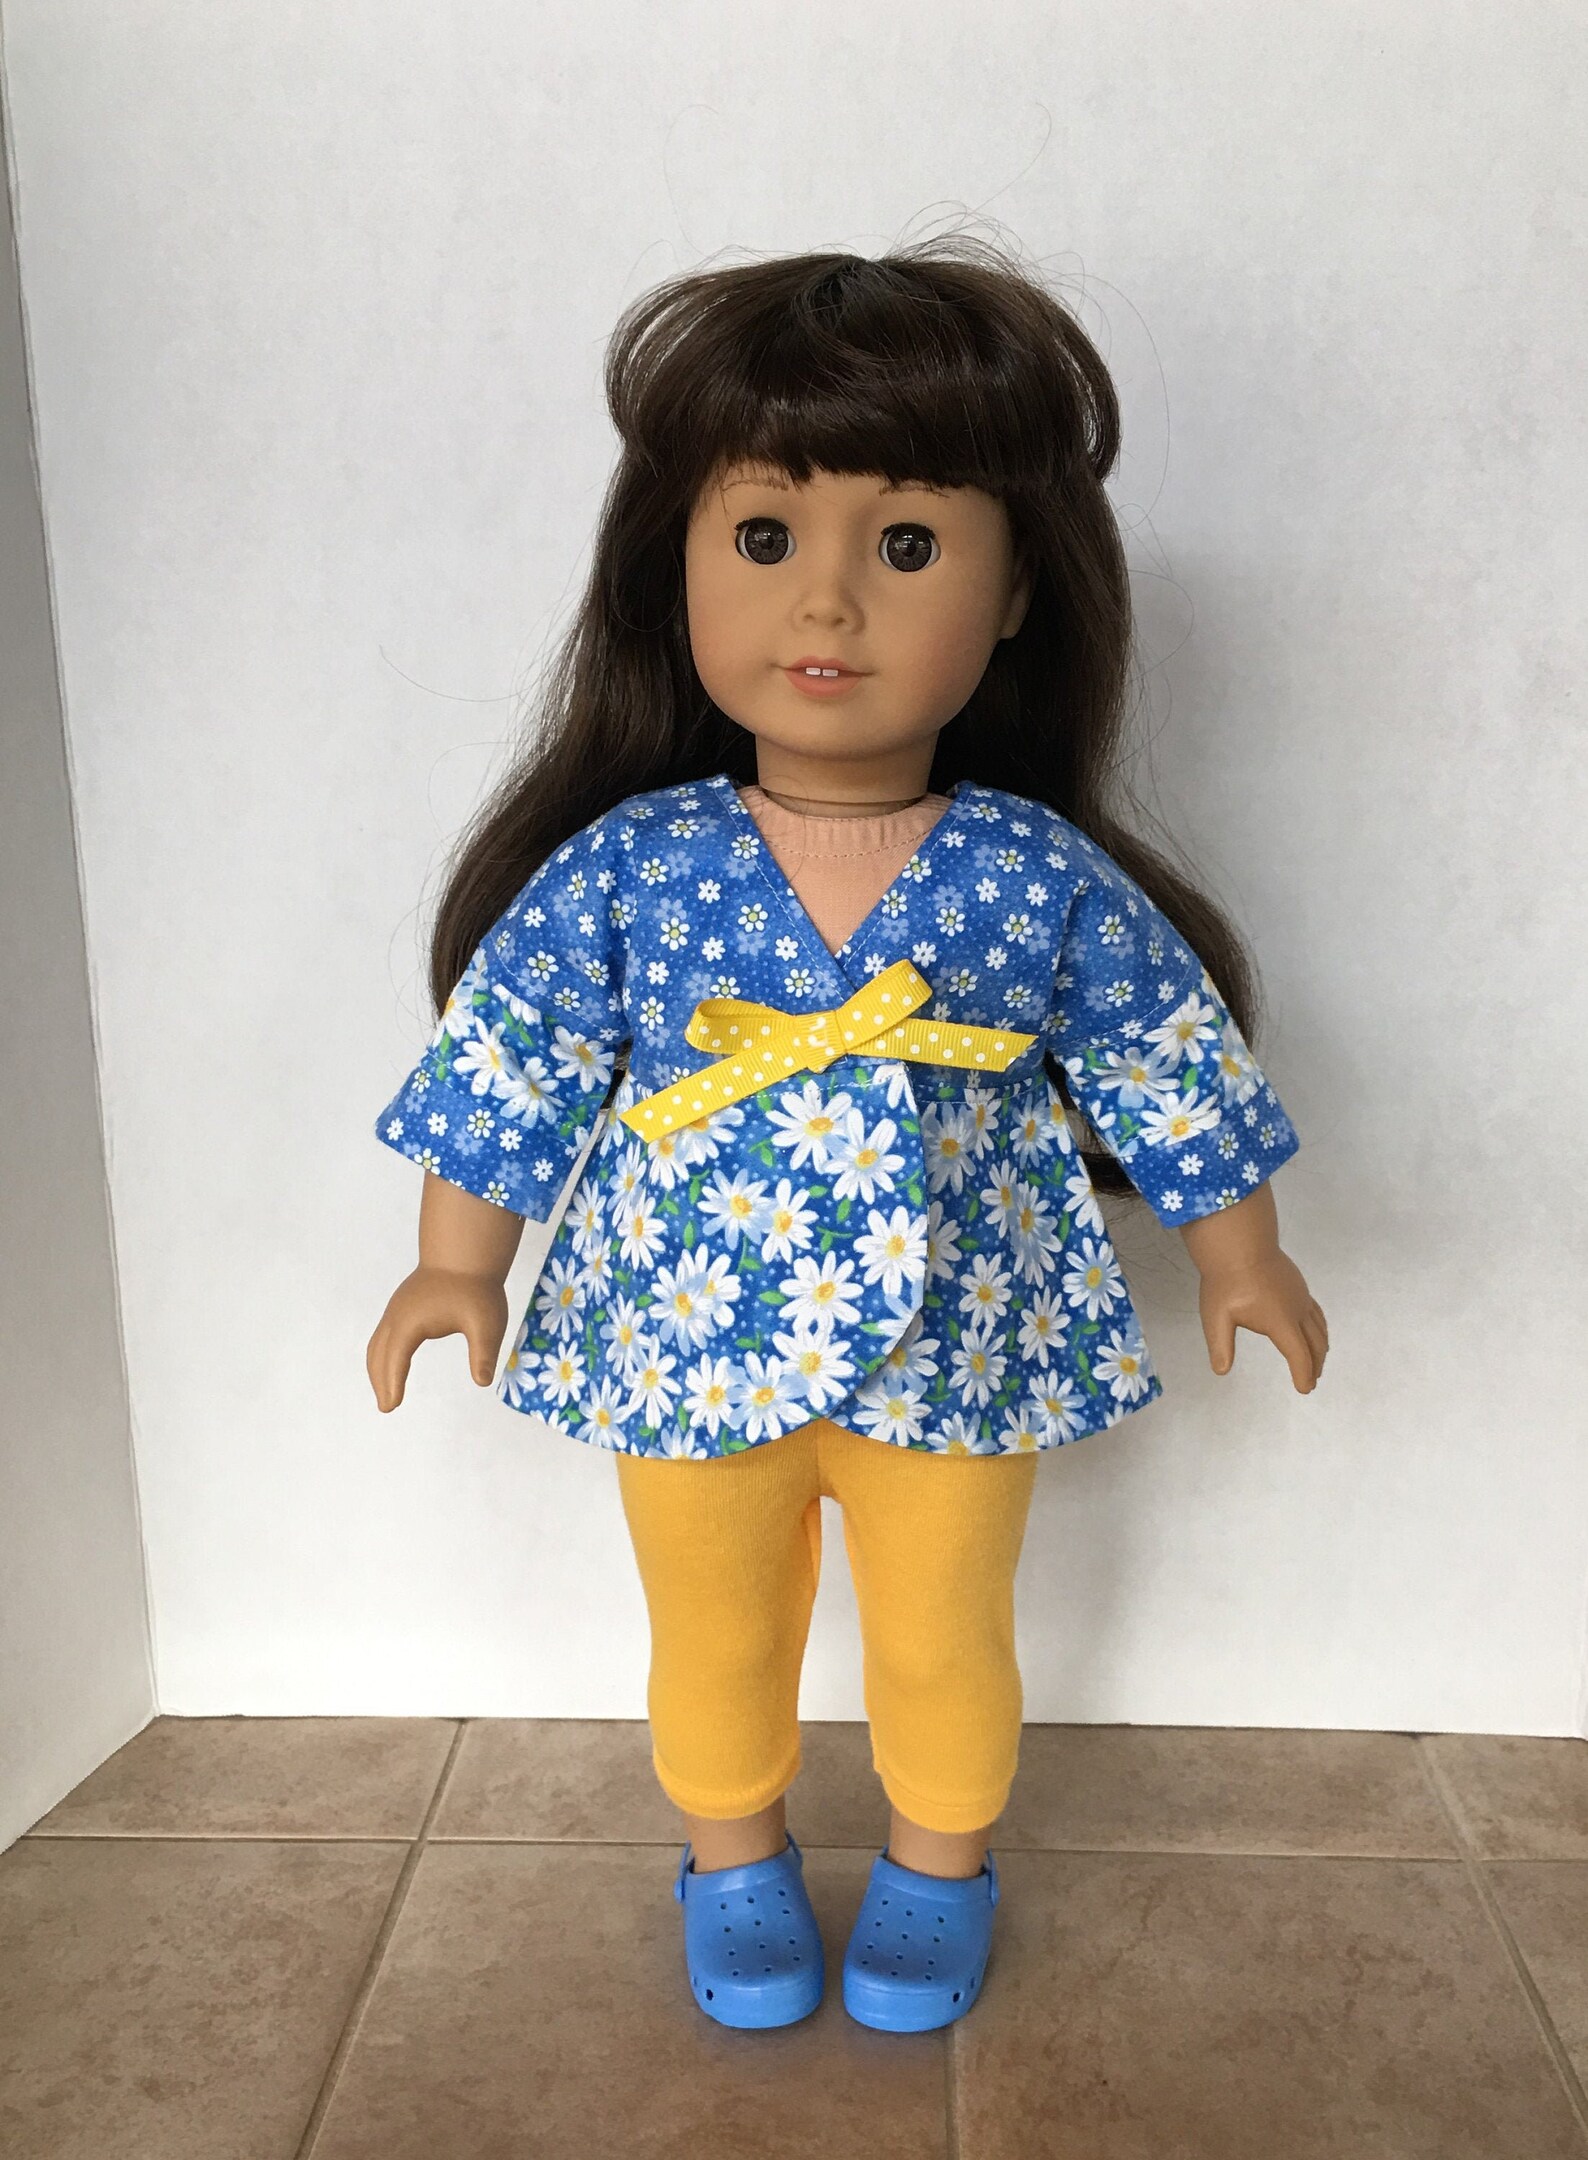 American Girl and Other 18 Doll Clothing | Etsy